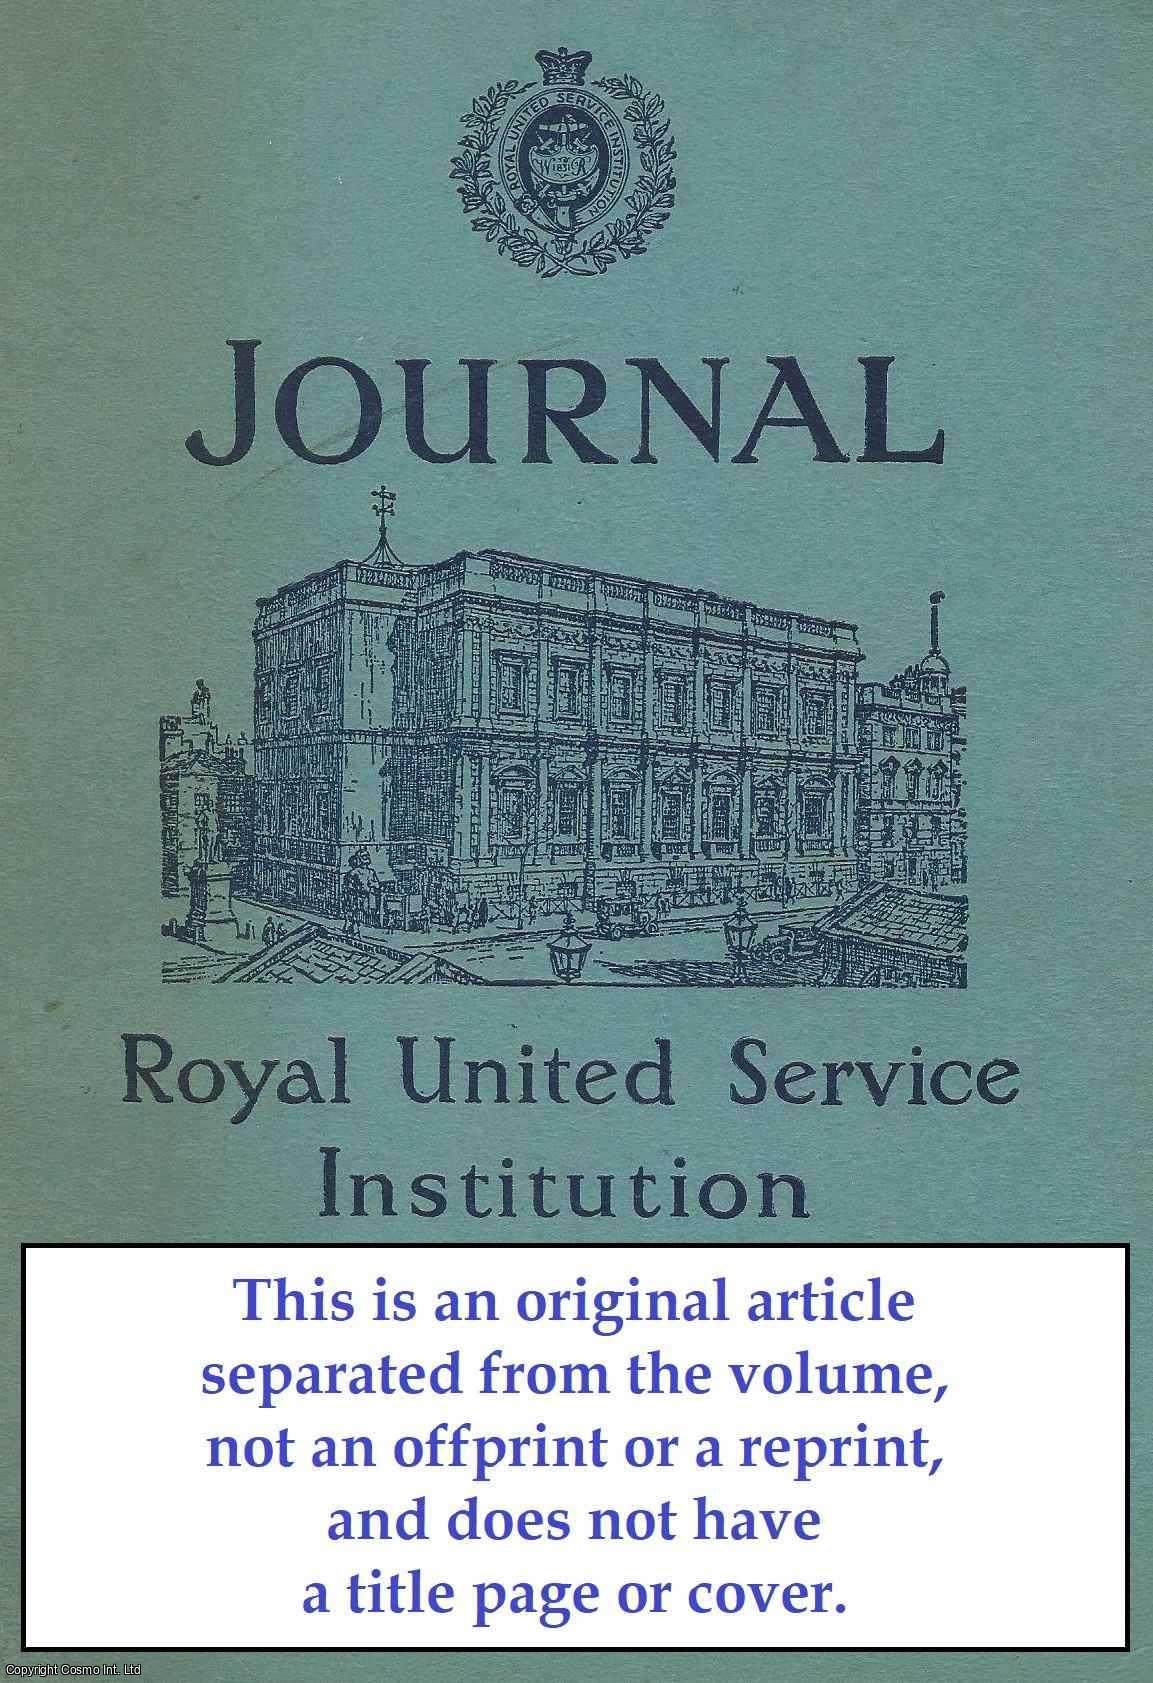 Edgar O'Balance - The MacArthur Plan. An original article from The Royal United Service Institution Journal, 1965.